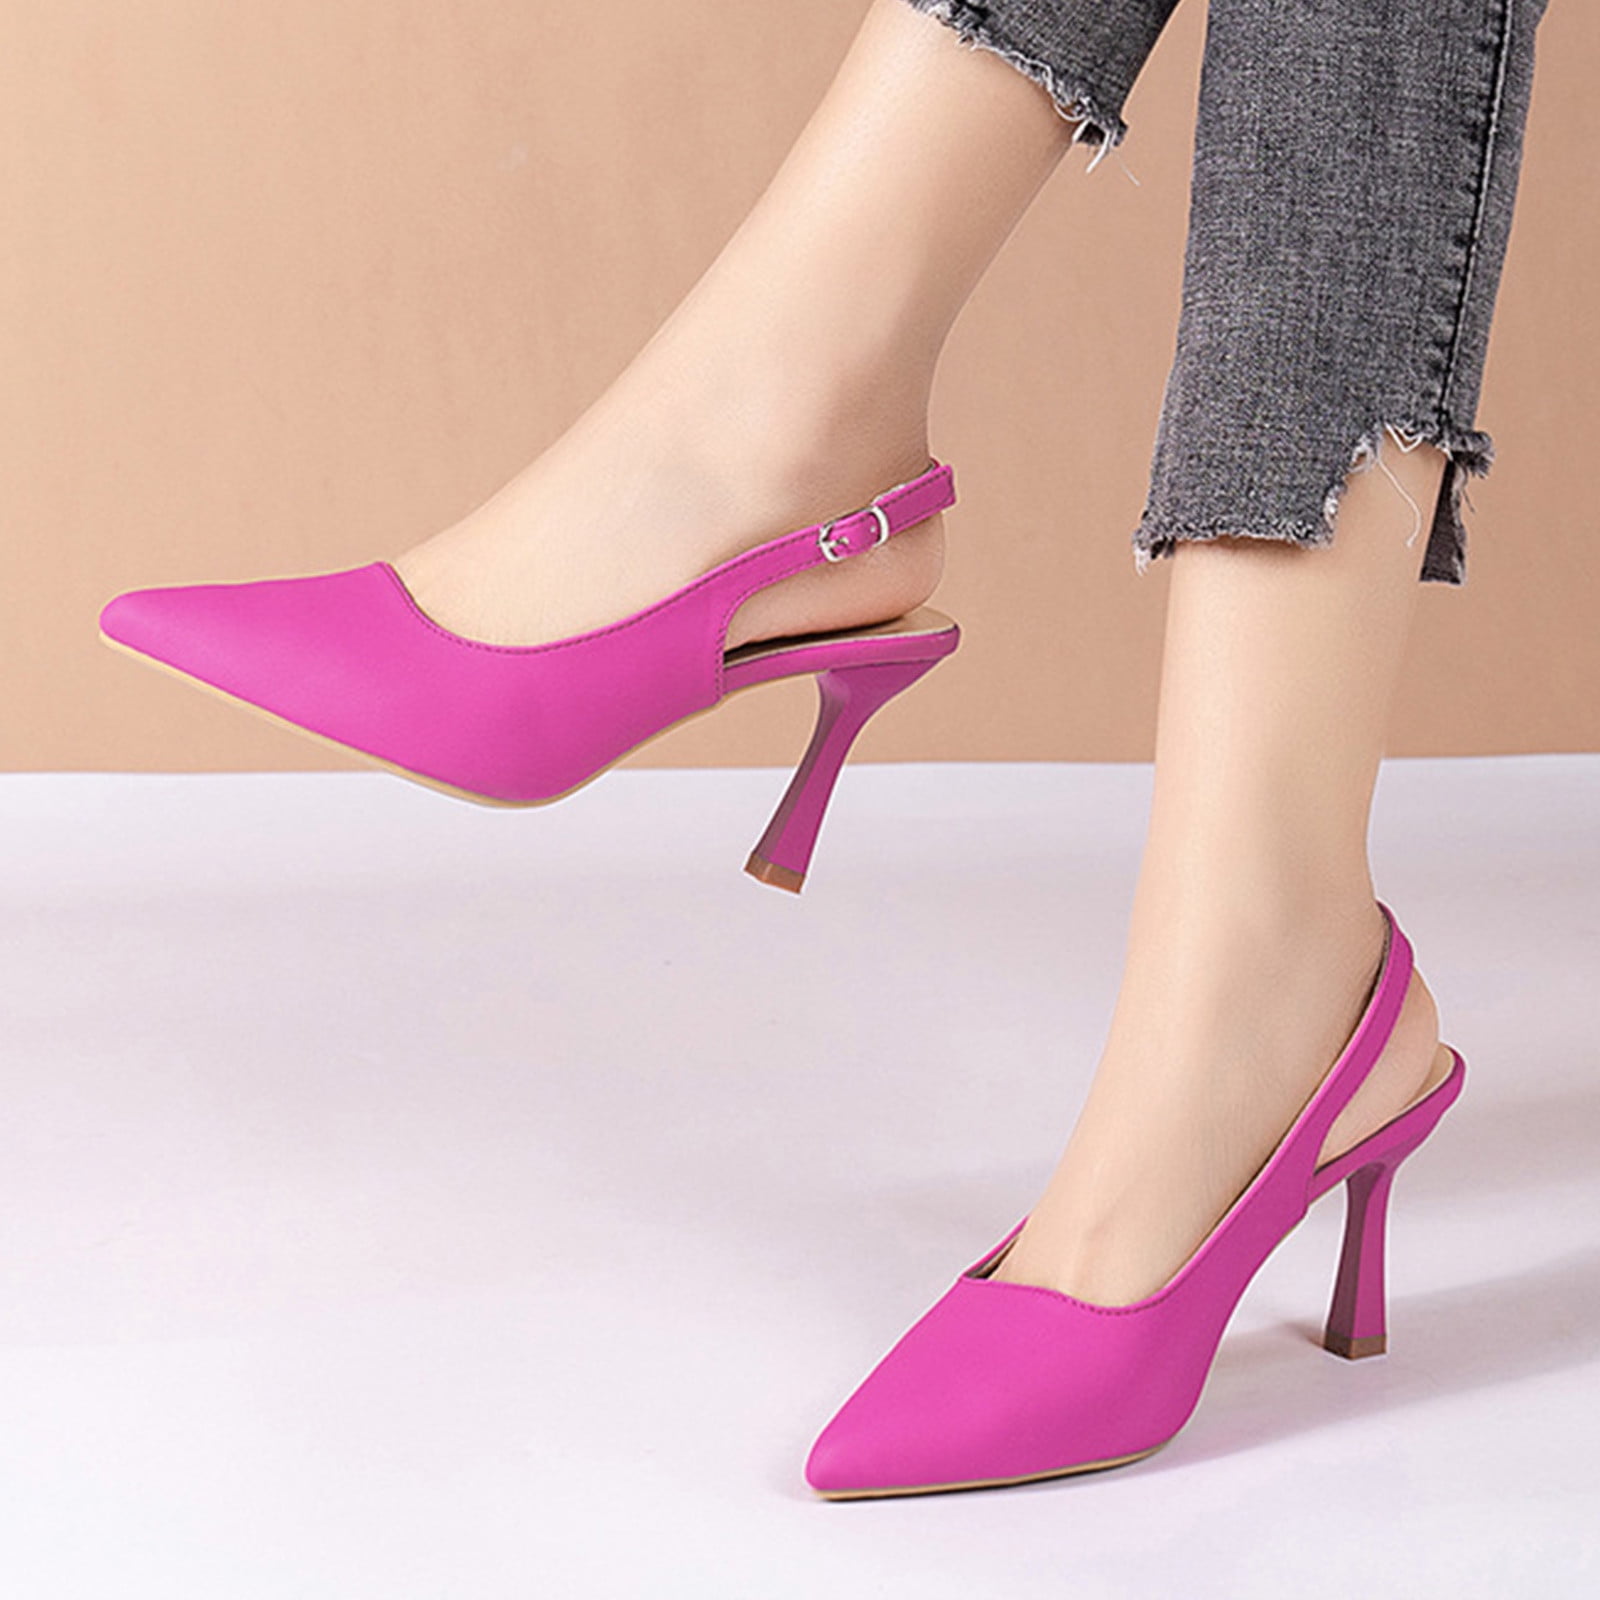 What Happens To Your Body When You Wear Heels Every Day